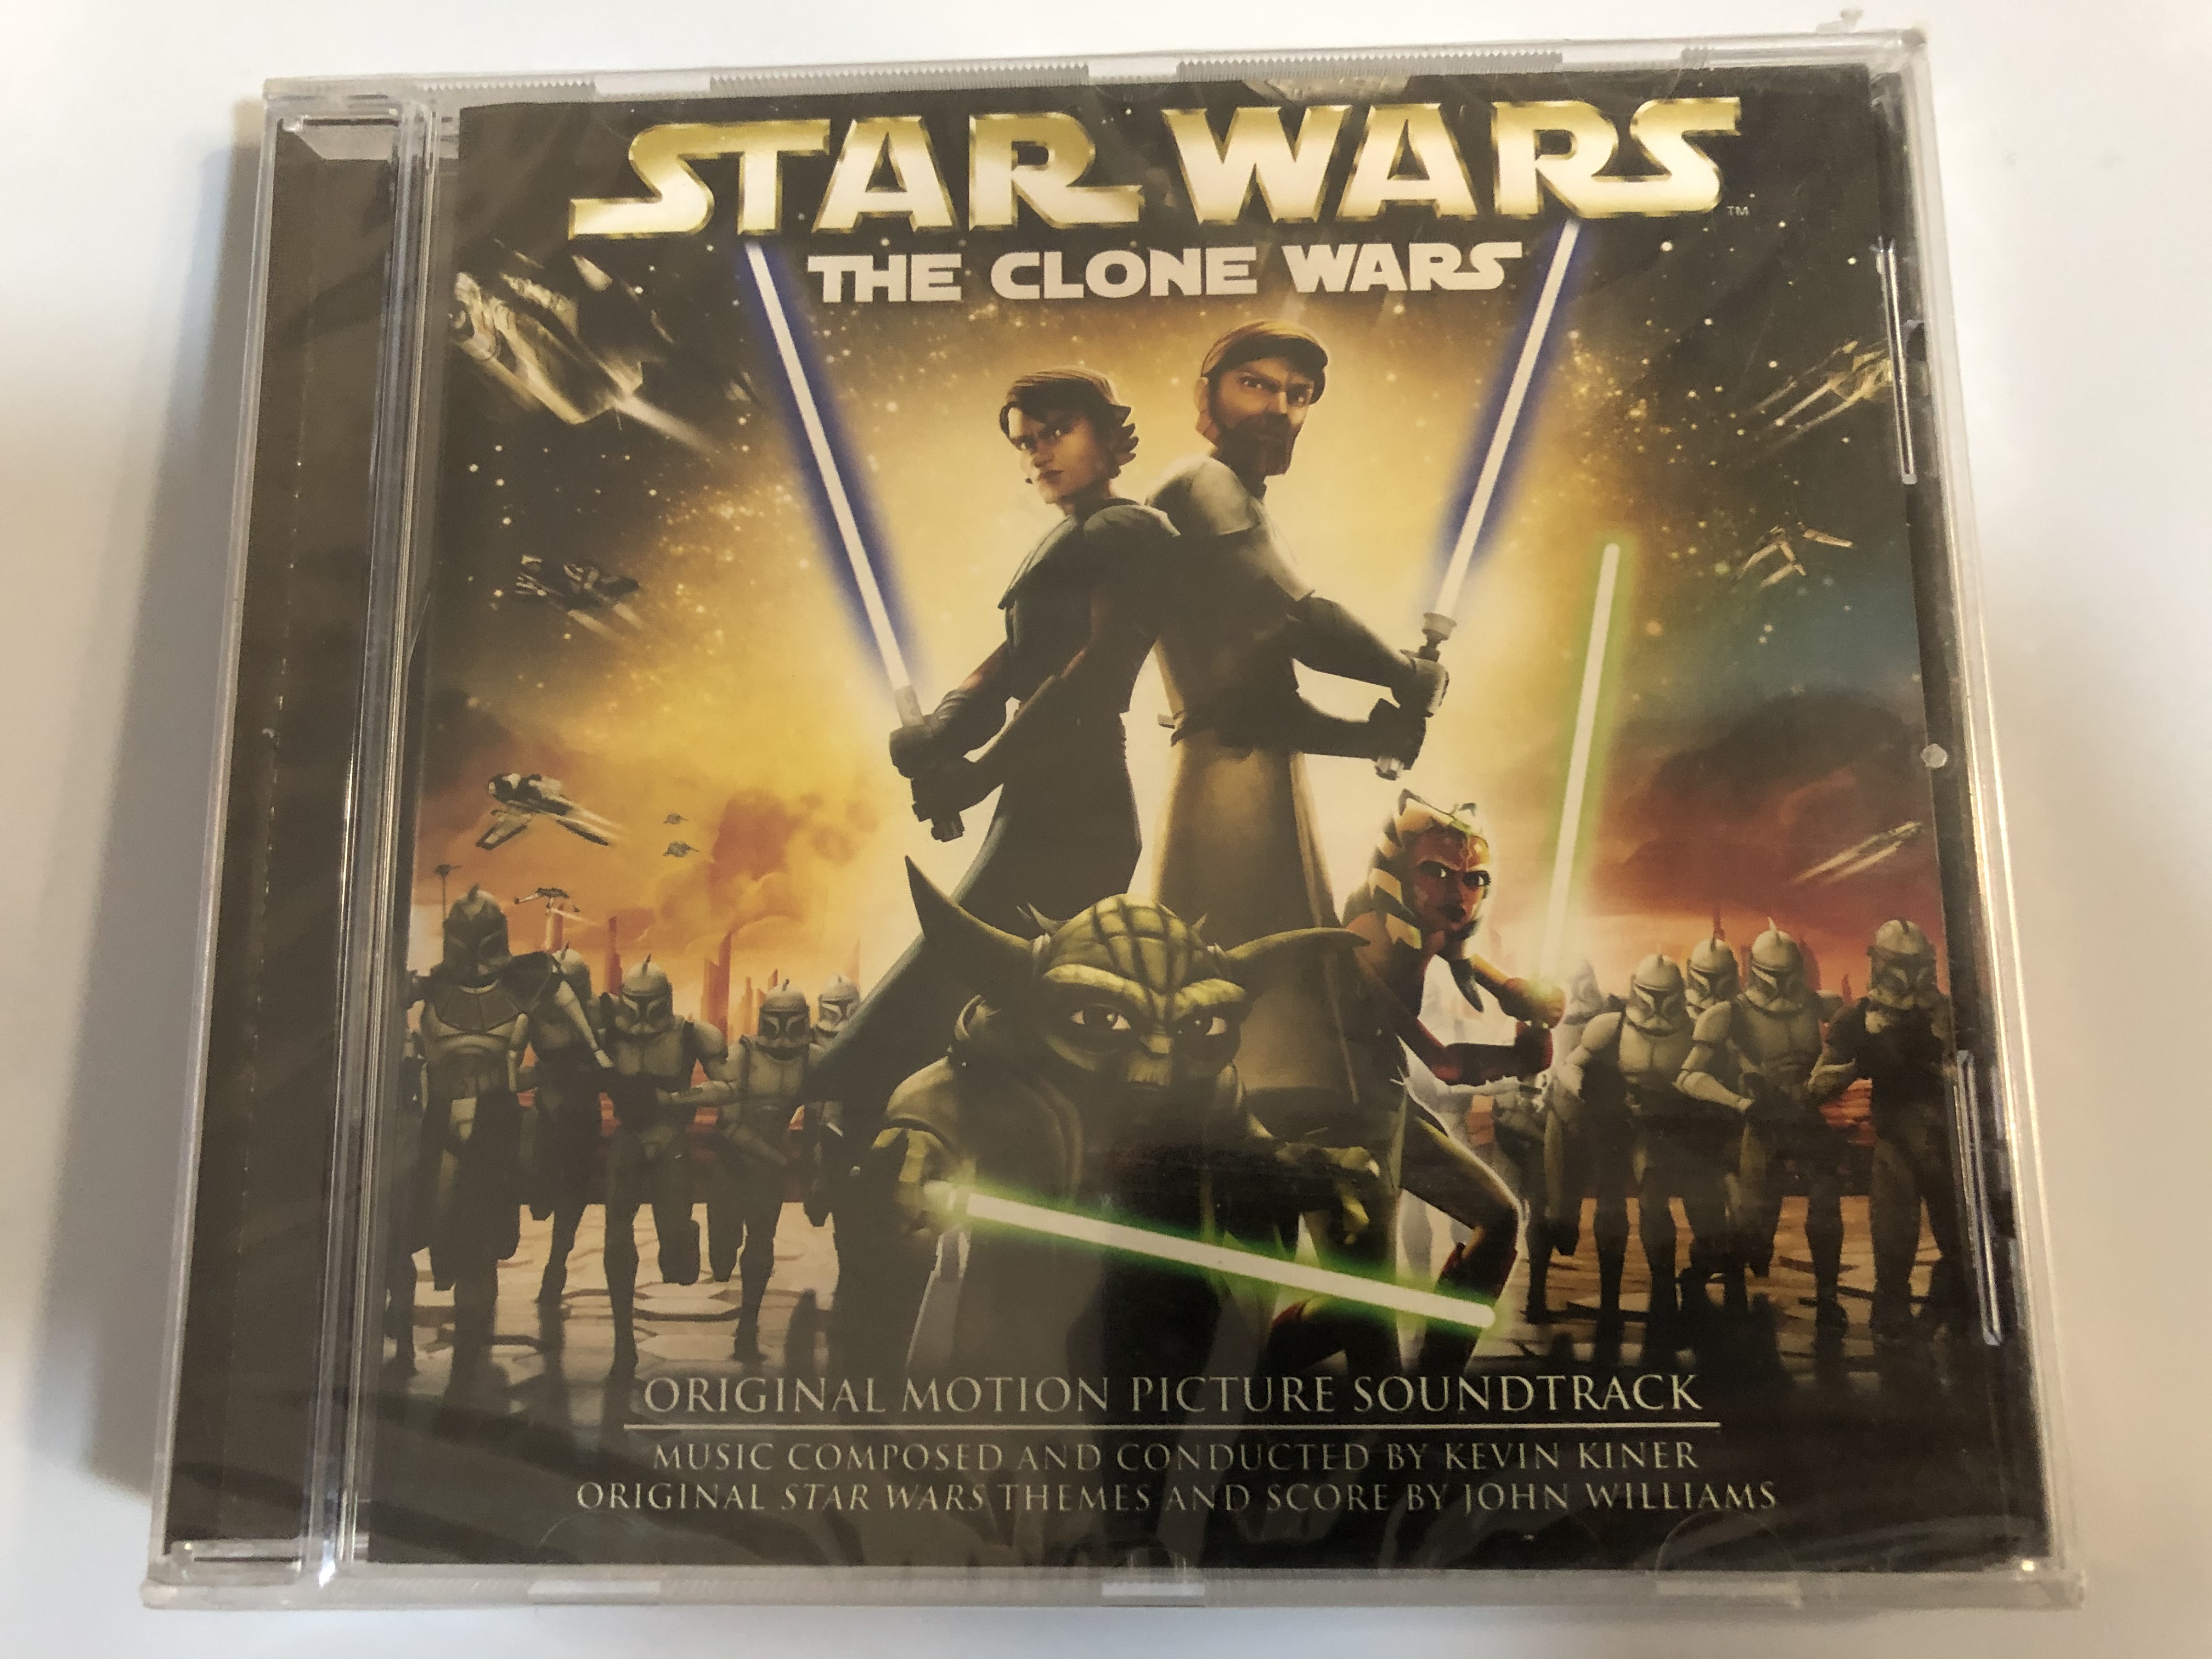 star-wars-the-clone-wars-original-motion-picture-soundtrack-music-composed-and-conducted-by-kevin-kiner-original-star-wars-themes-and-score-by-john-williams-sony-classical-audio-cd-2008-1-.jpg